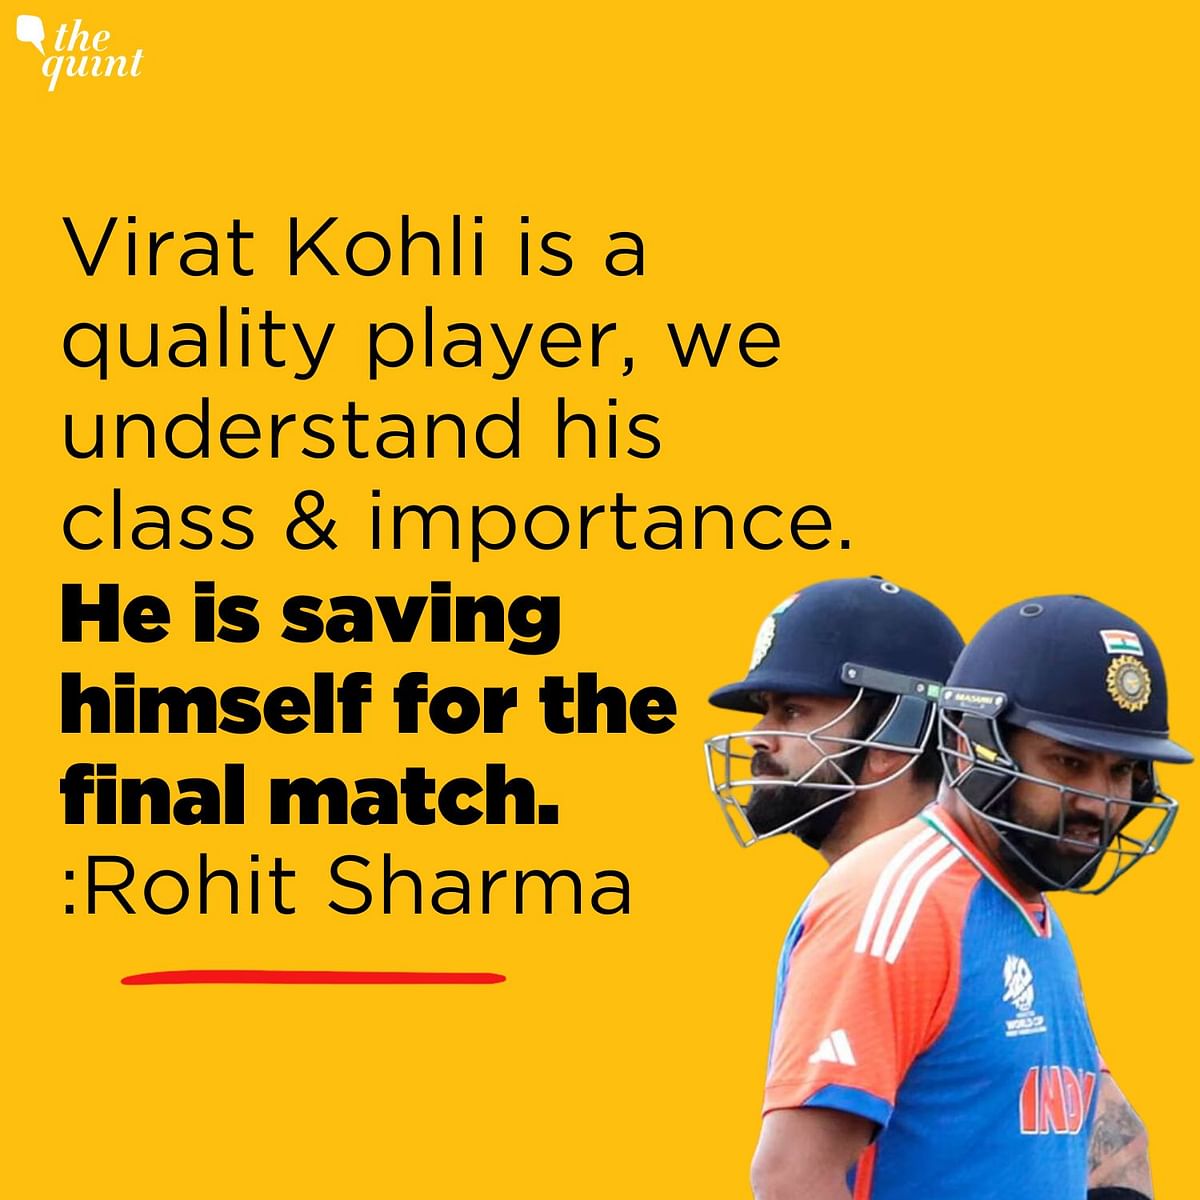 Throughout the tournament so far, Kohli's bat has been relatively quiet, accumulating just 75 runs in seven innings.